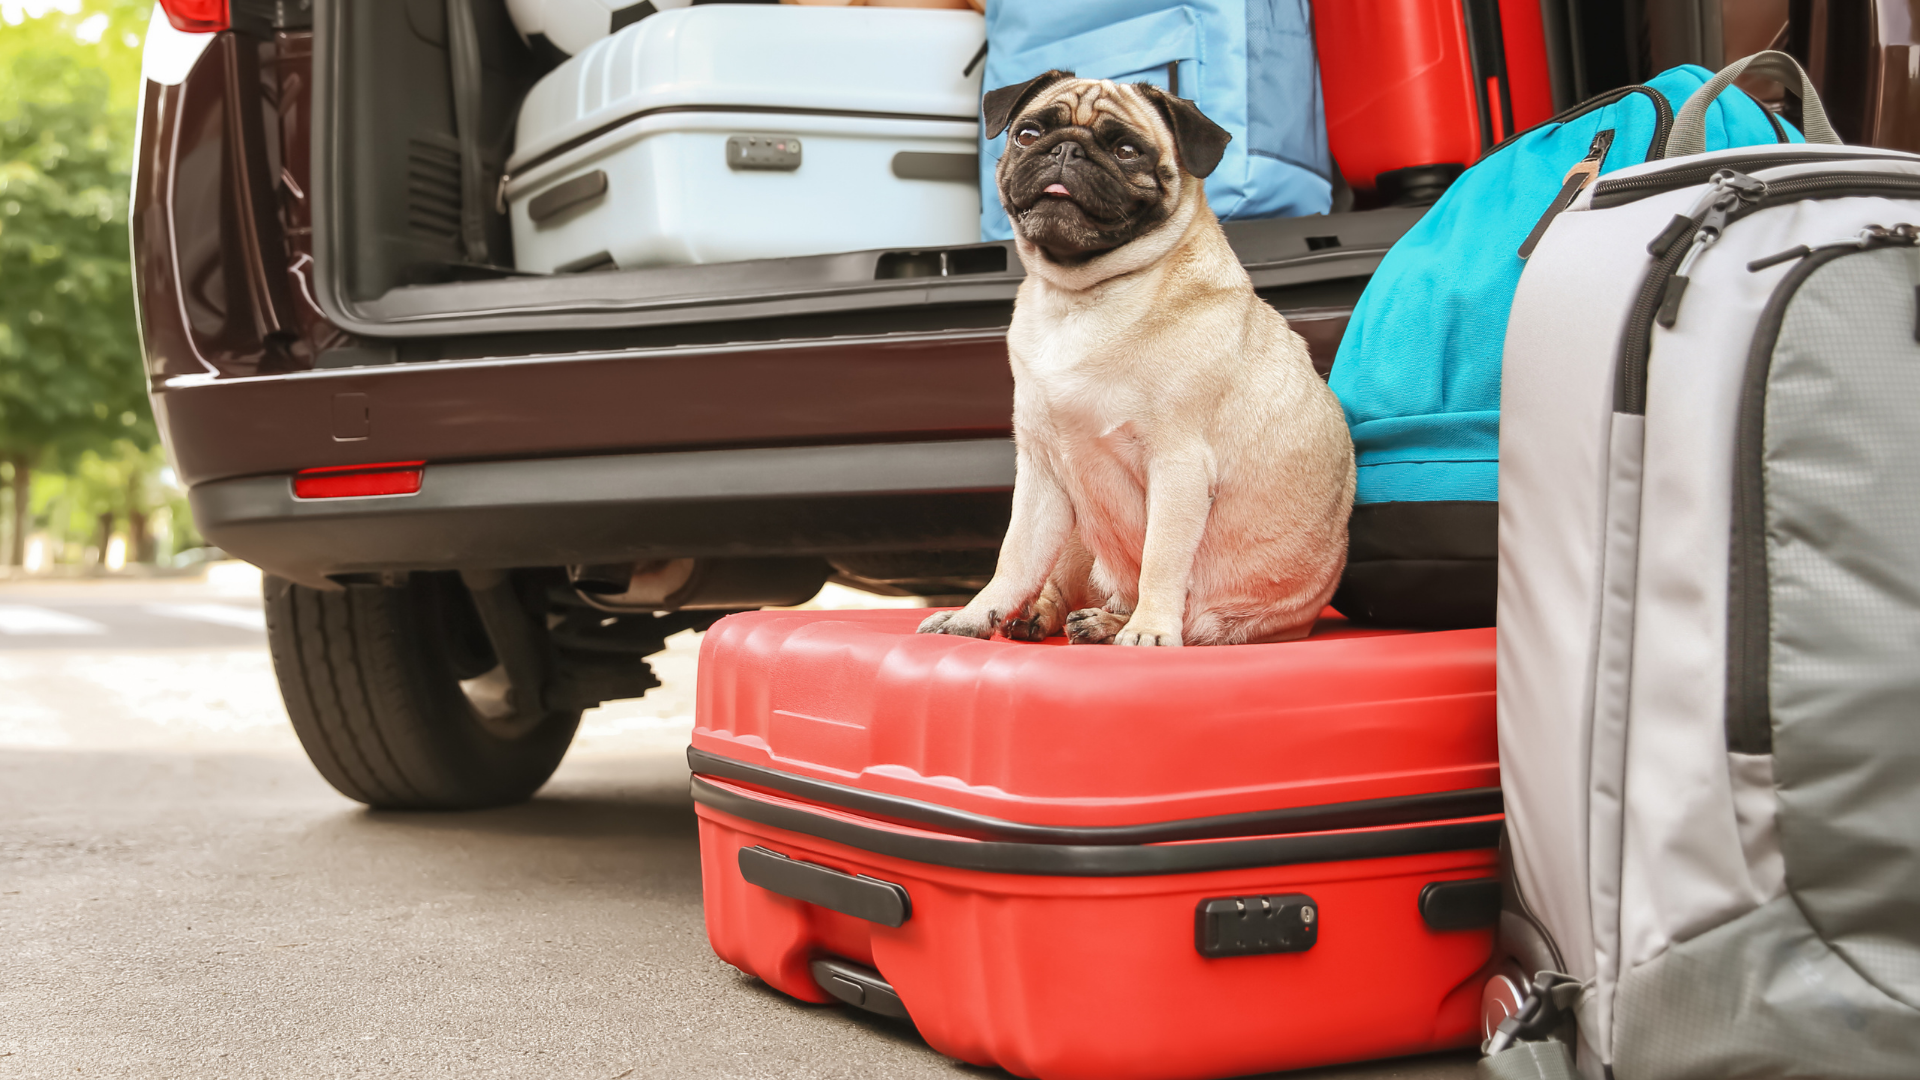 Brown and black pug sitting on red luggage suitcase near vehicle